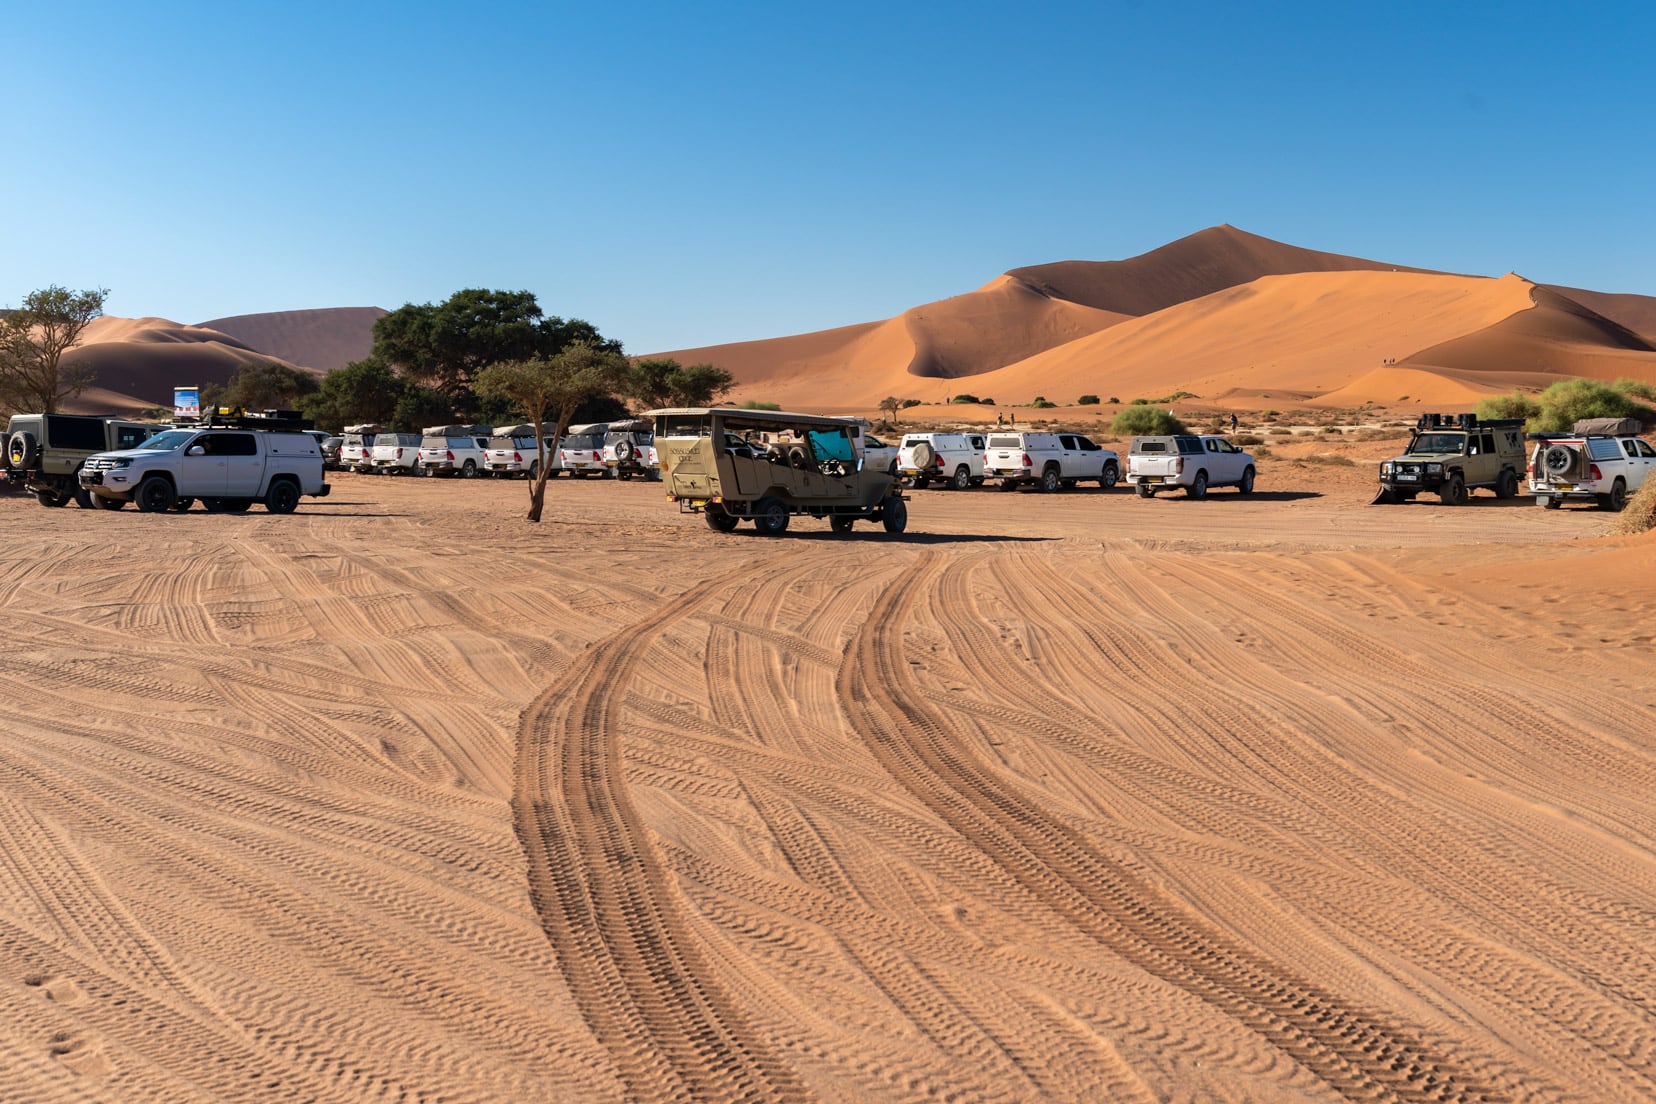 Sossusvlei car park with shuttle and cars and Big daddy dune in the background